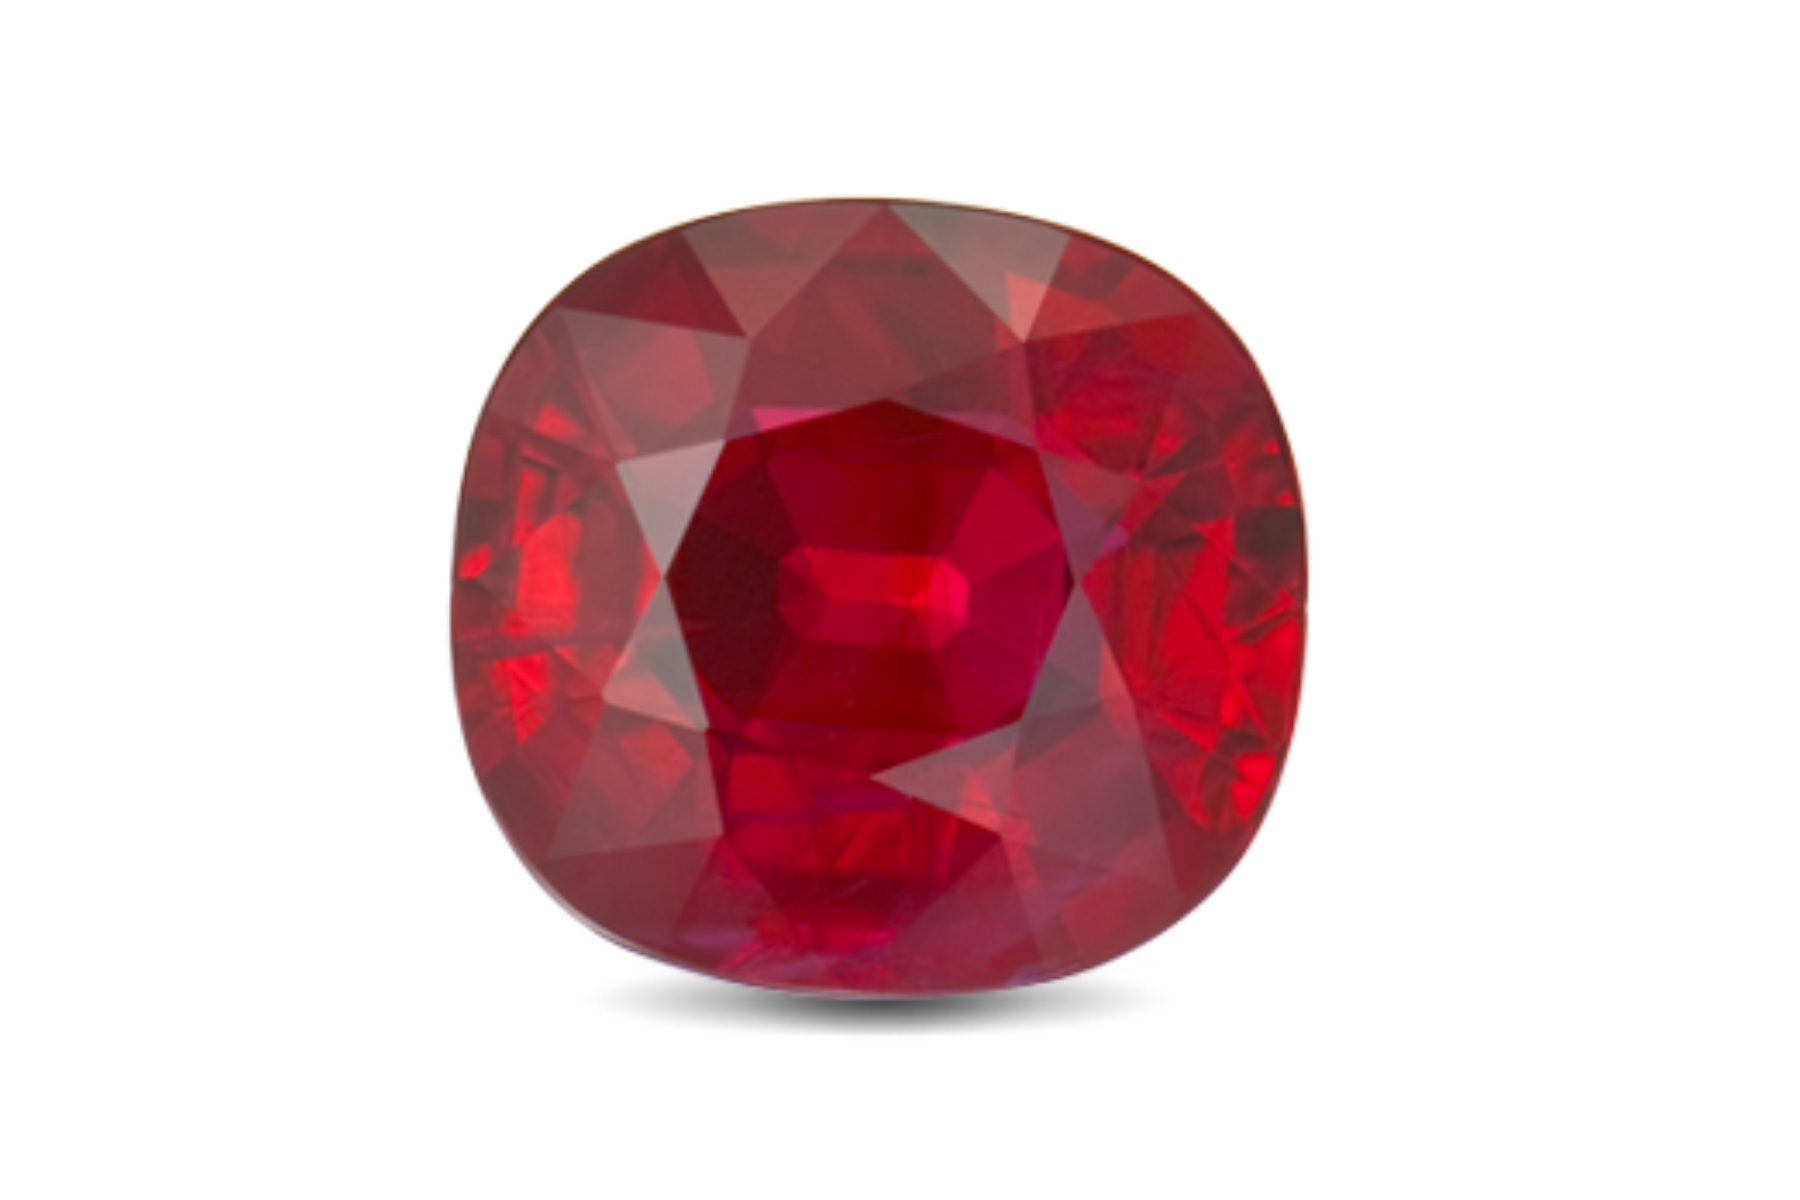 Soft-cornered square red ruby